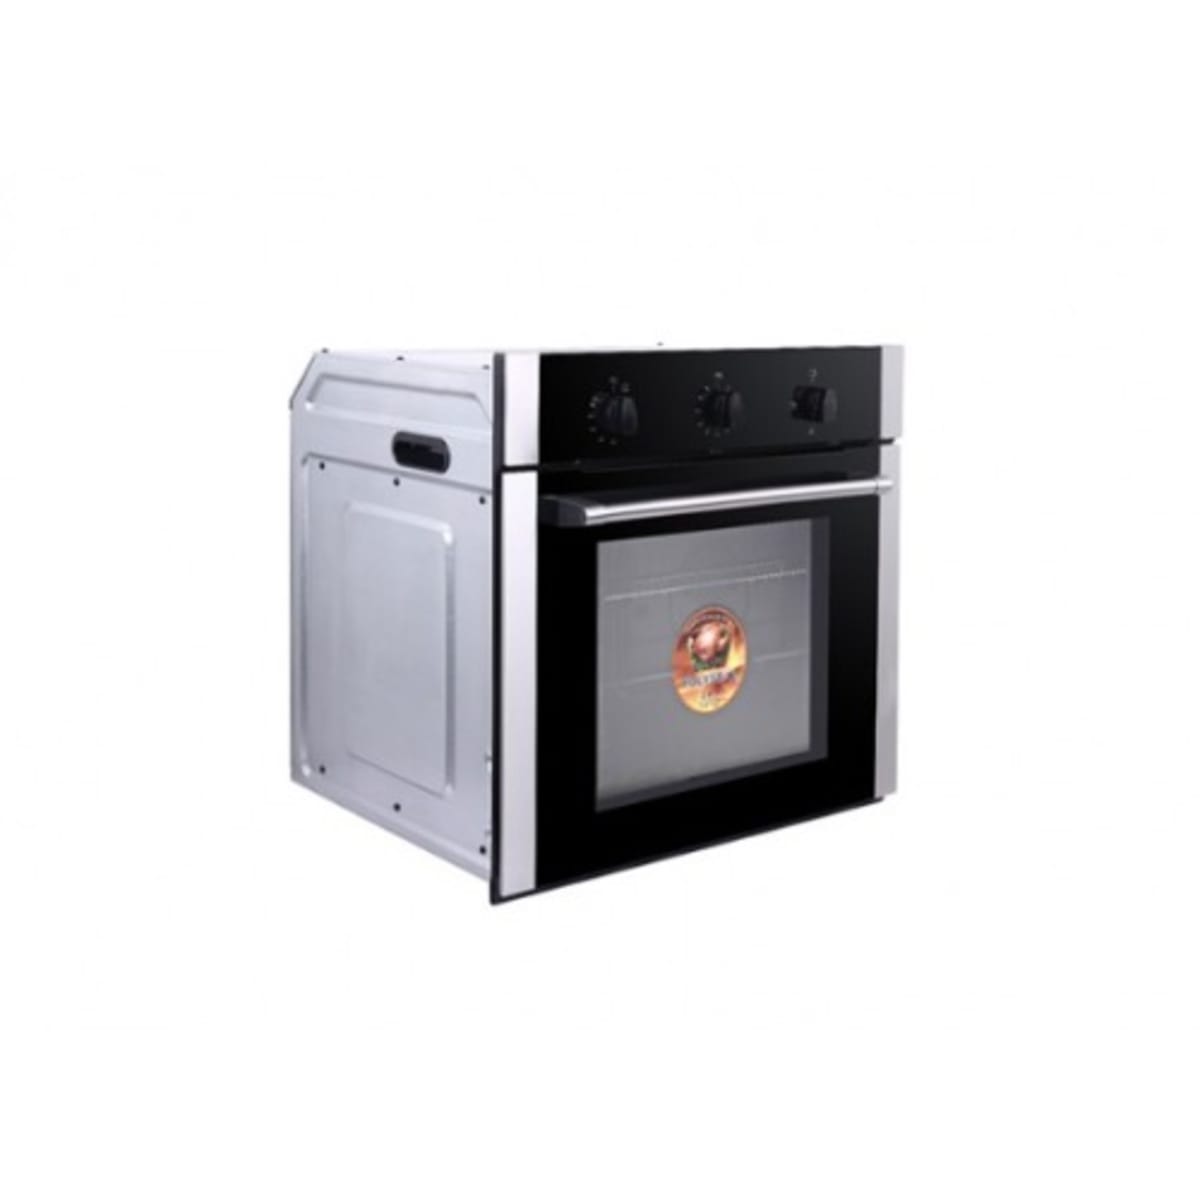 Ovens: built-in, electric or gas